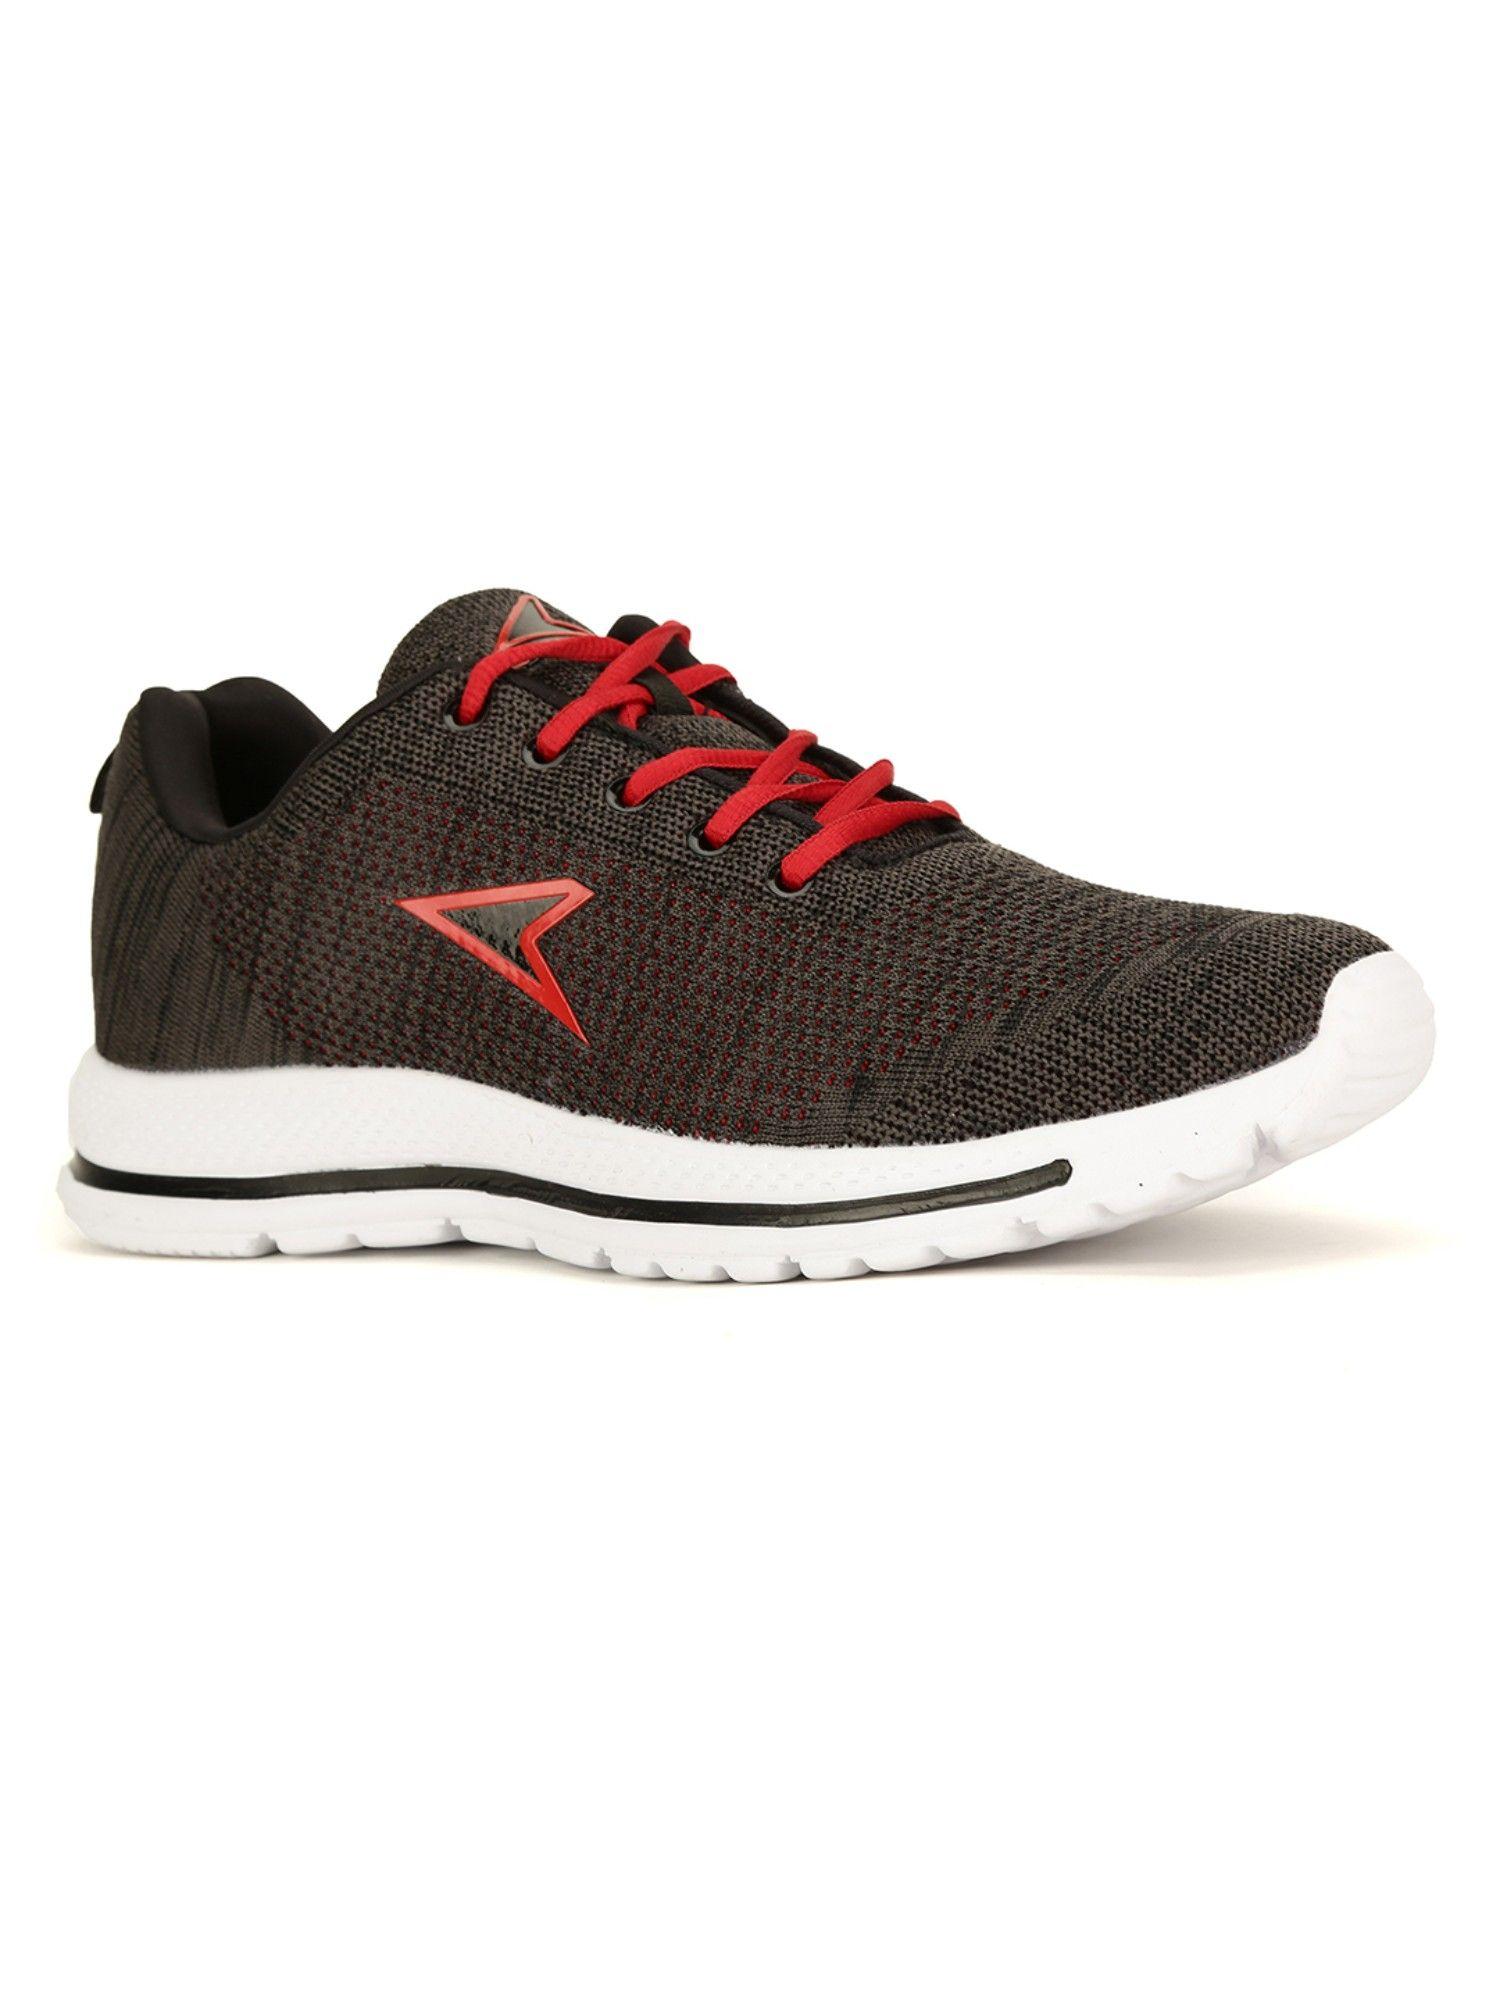 woven-multicolor-running-shoes